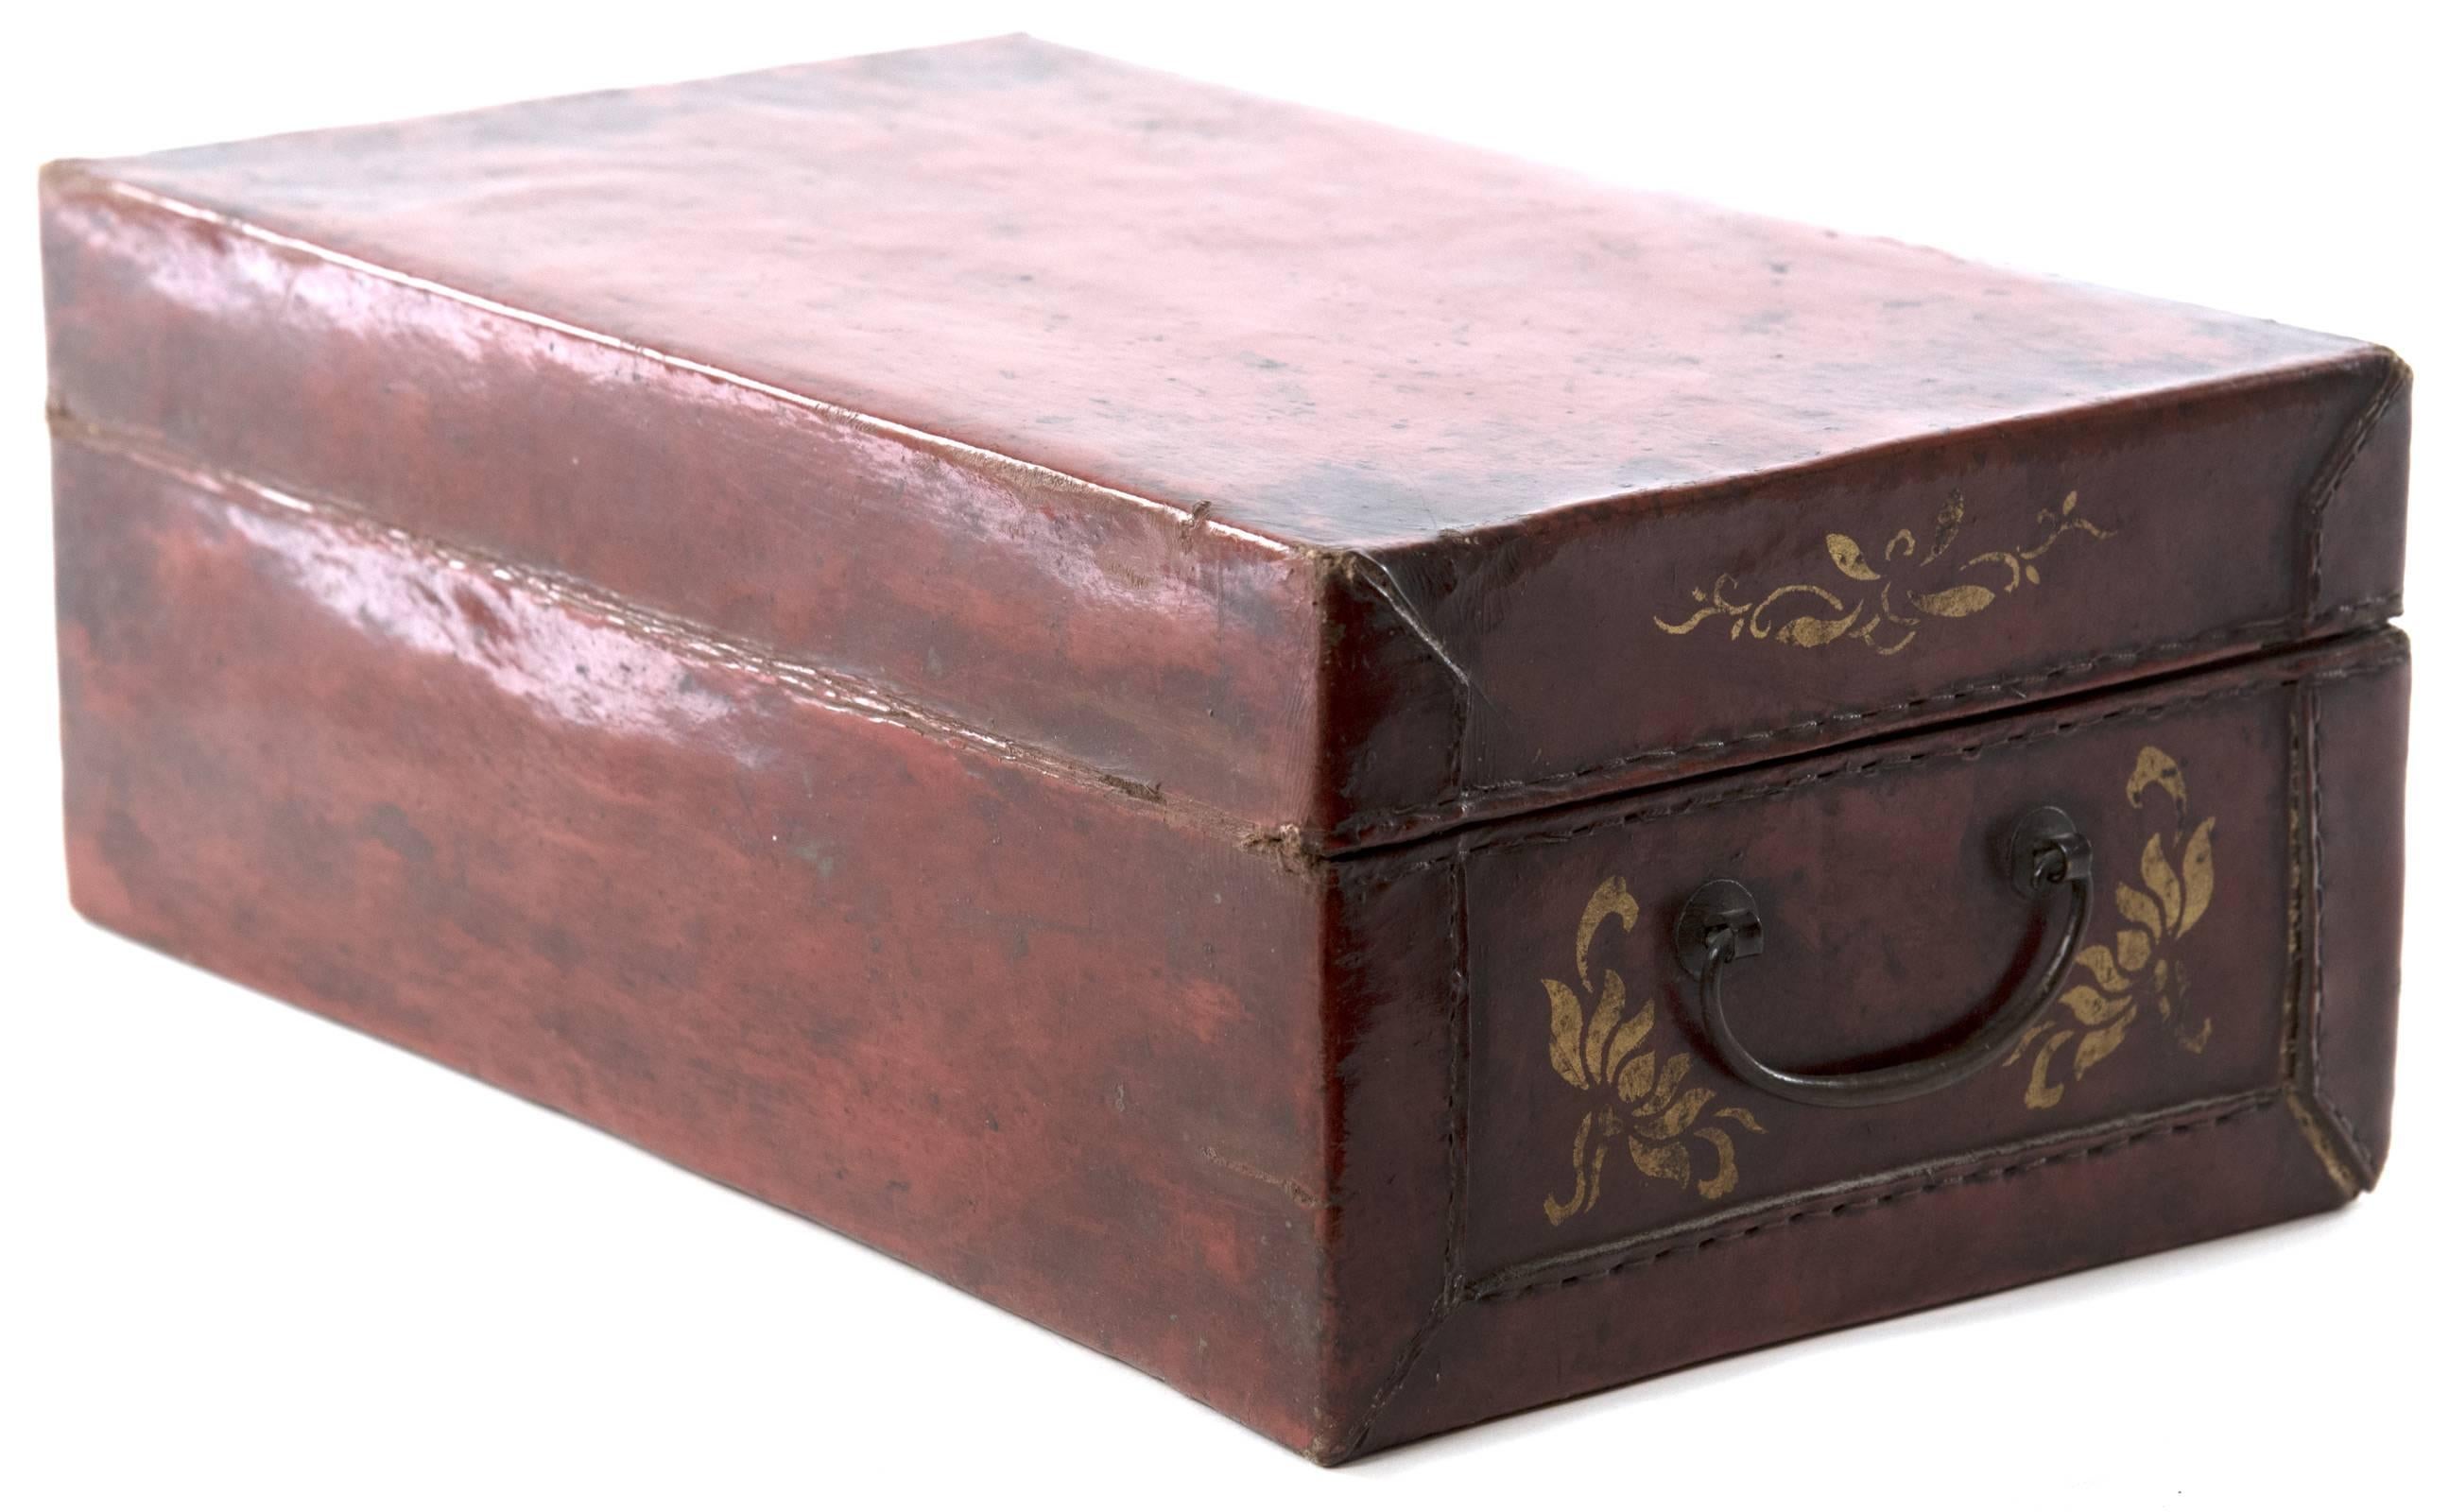 Chinese Red Leather Box with Gold-Stencil Foliate Ornamentation 1